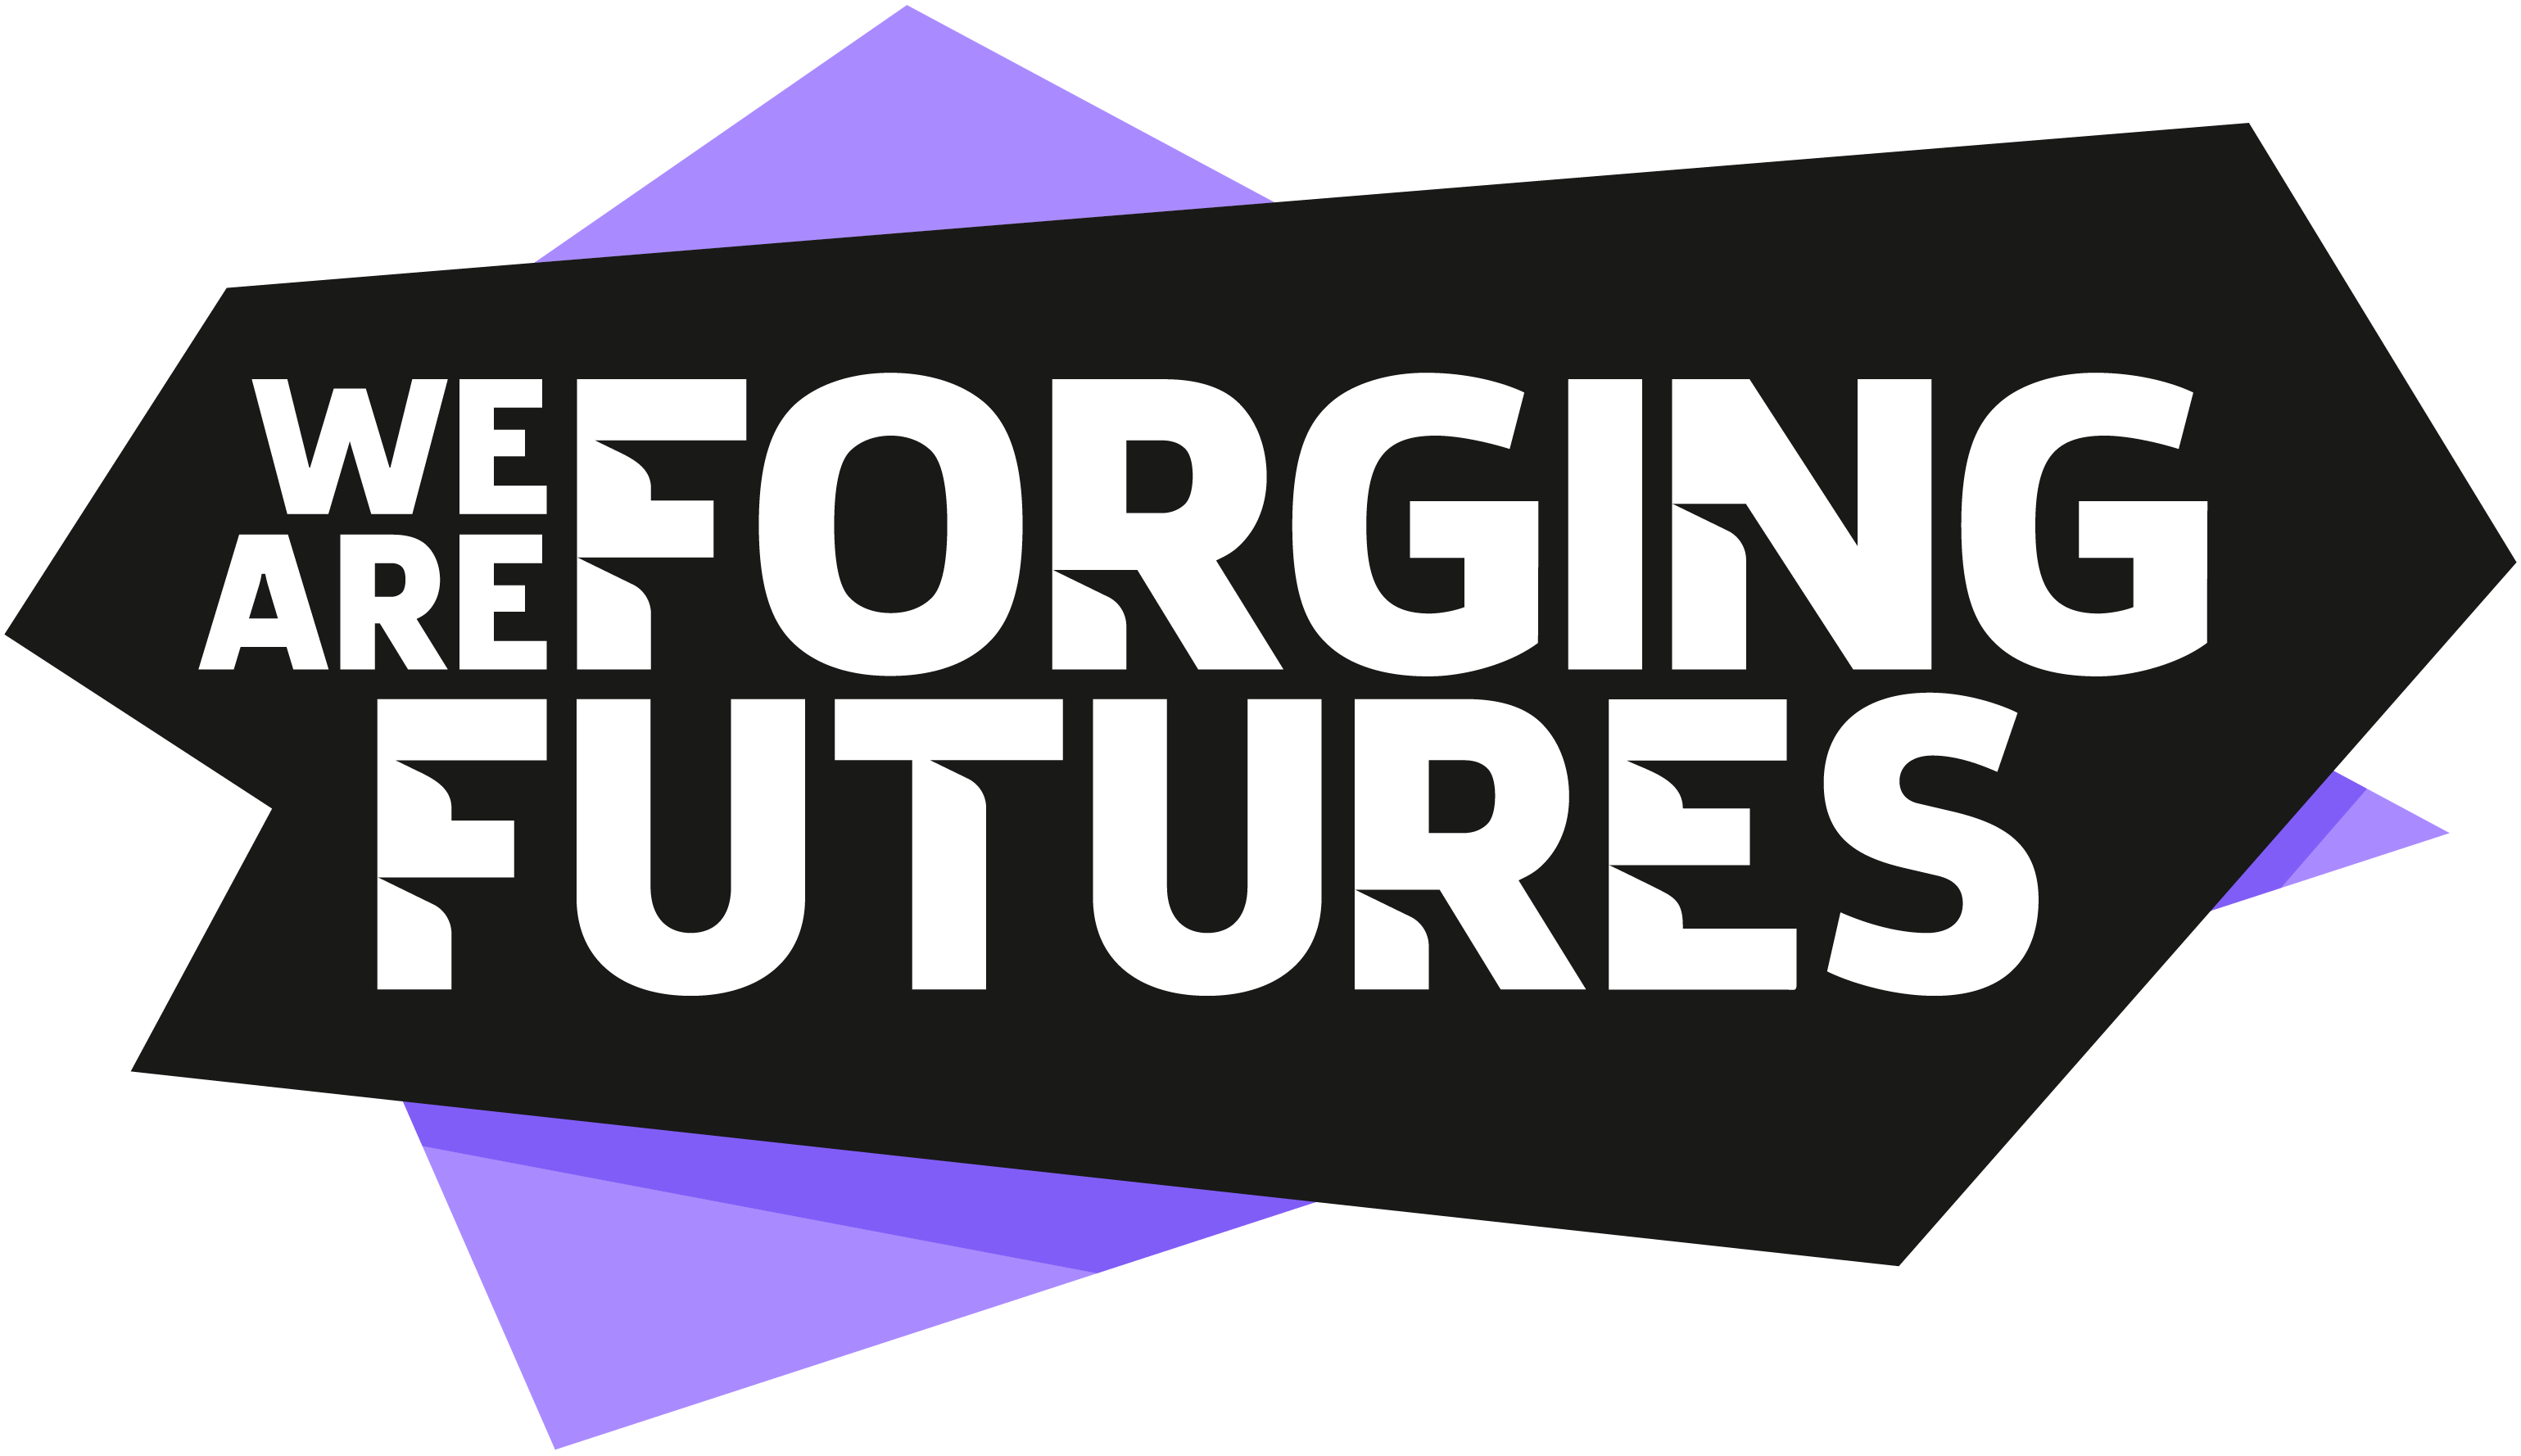 We Are Forging Futures